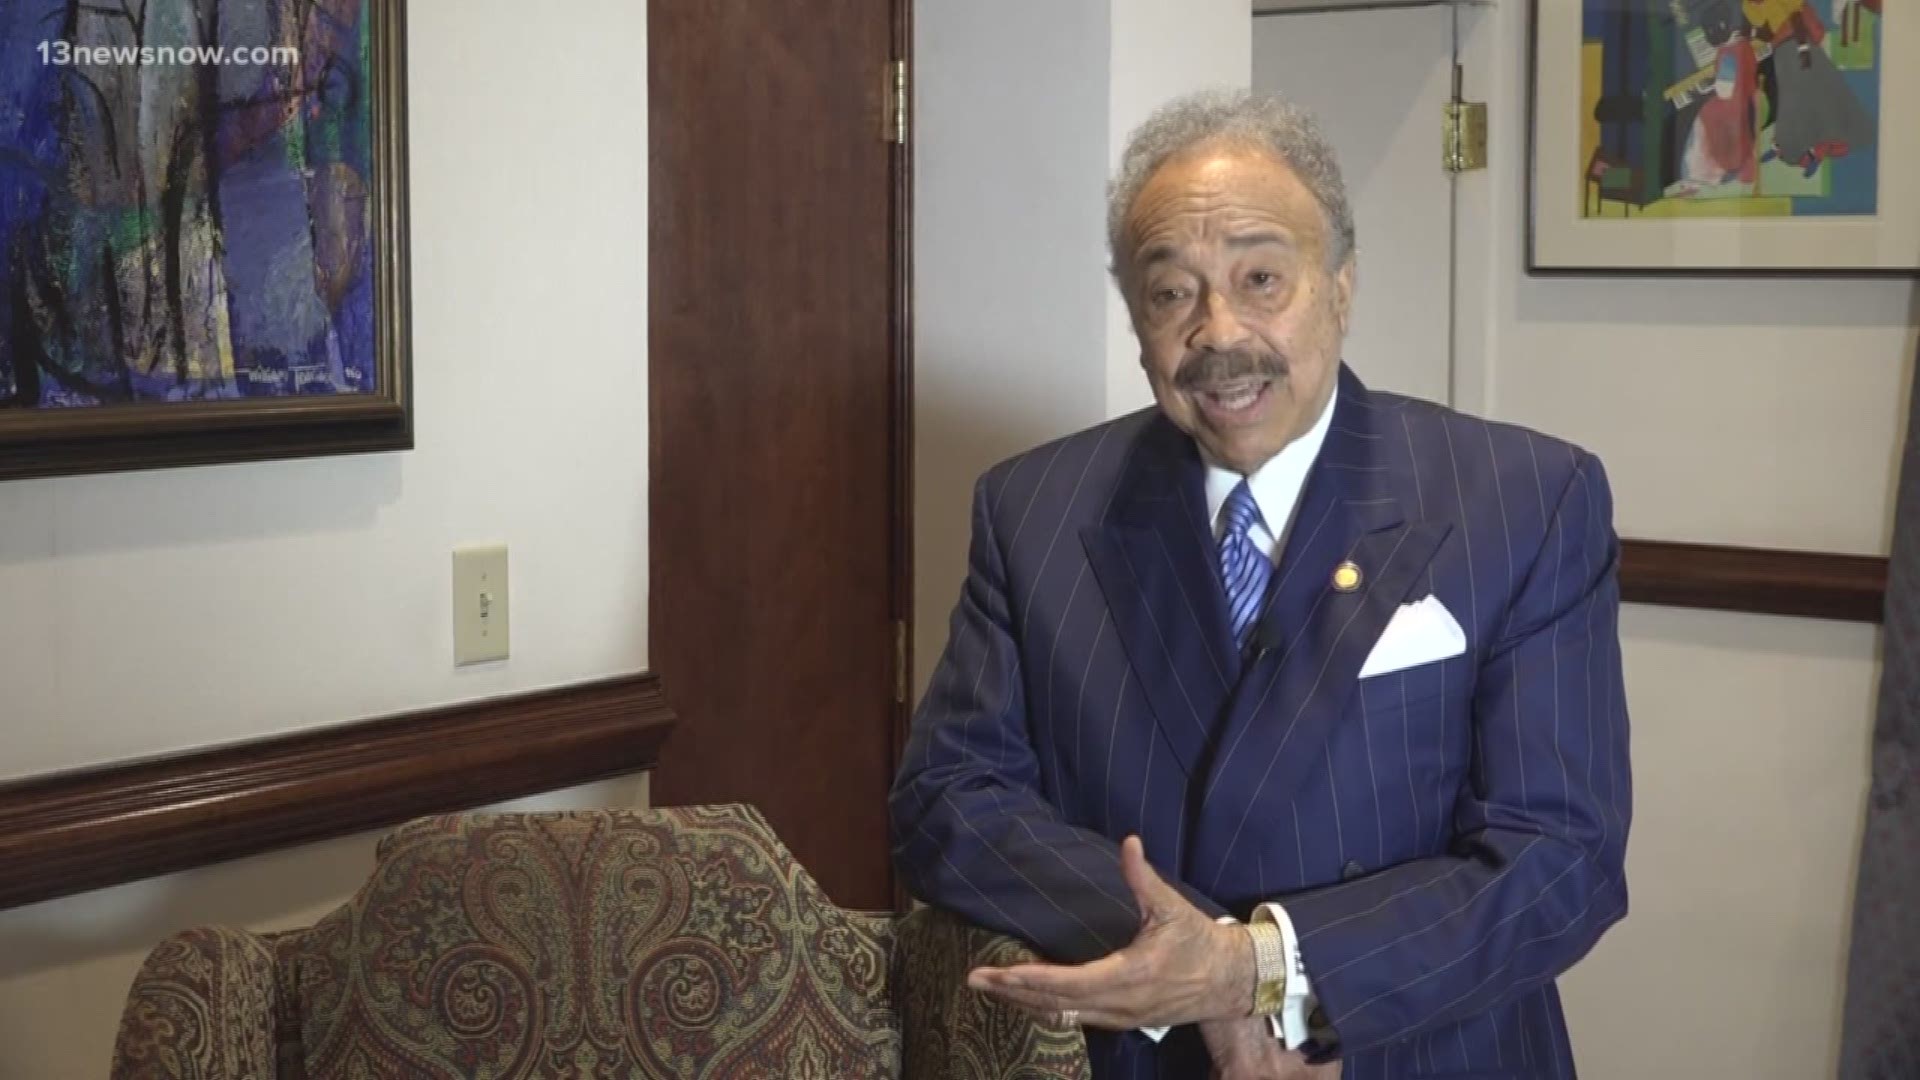 Dr. William R. Harvey is one of the longest-tenured university presidents in the nation. Harvey talked to 13News Now about his 42-year legacy and his plans for the future at Hampton University.